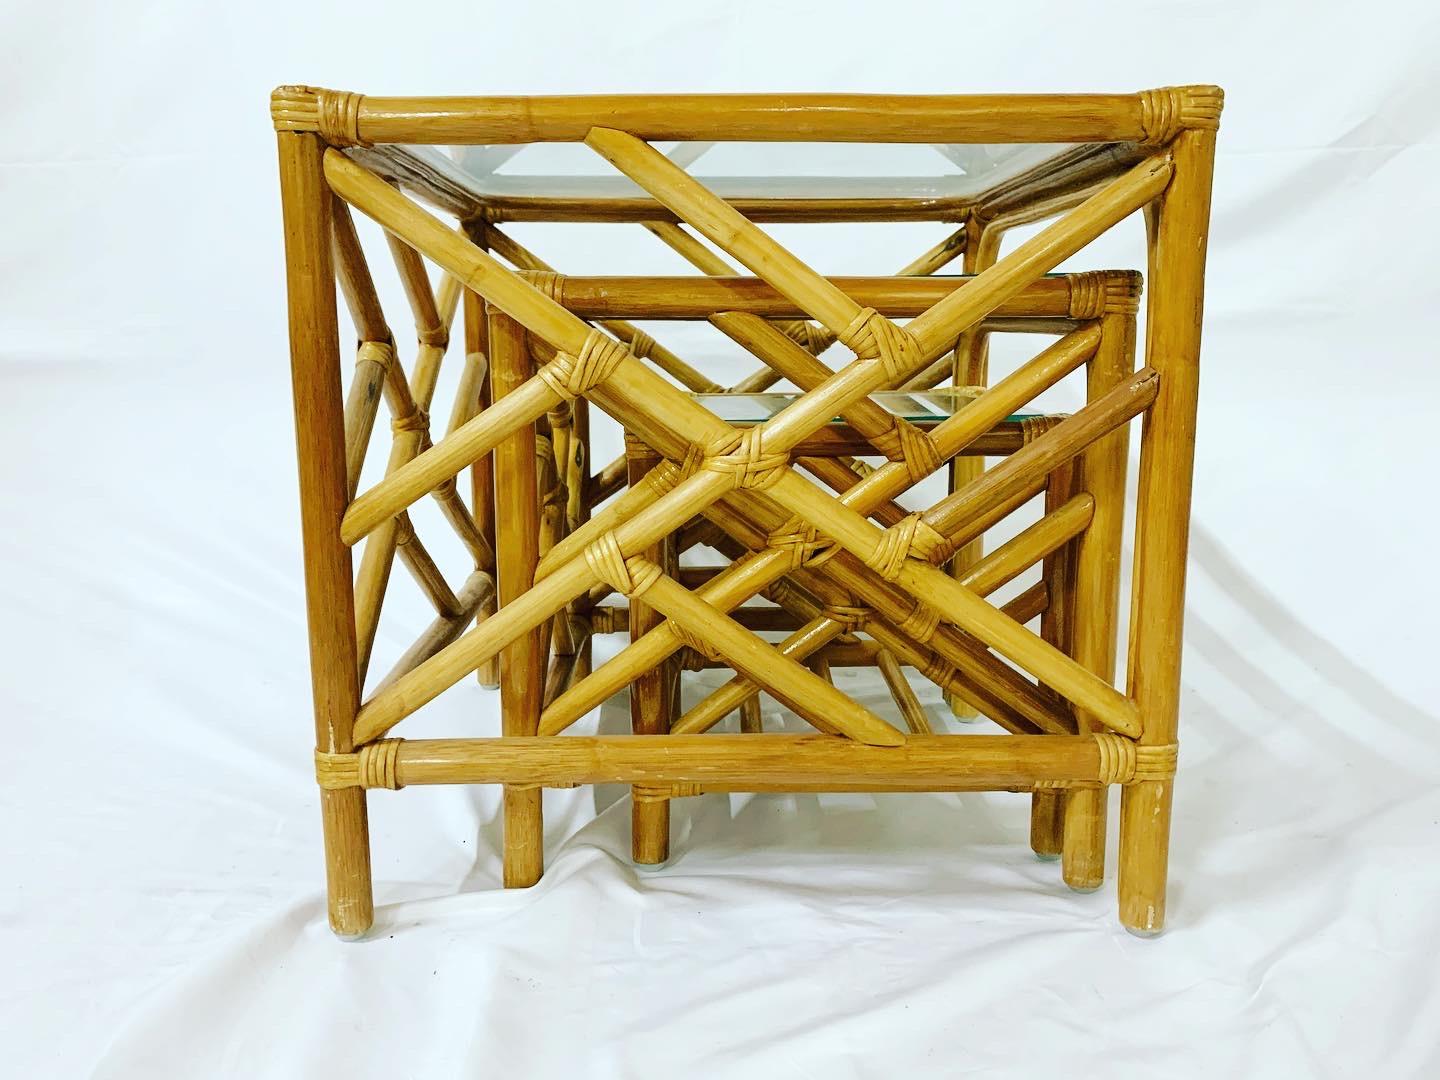 Chippendale Bamboo Rattan Nesting Tables – Set of 3 10